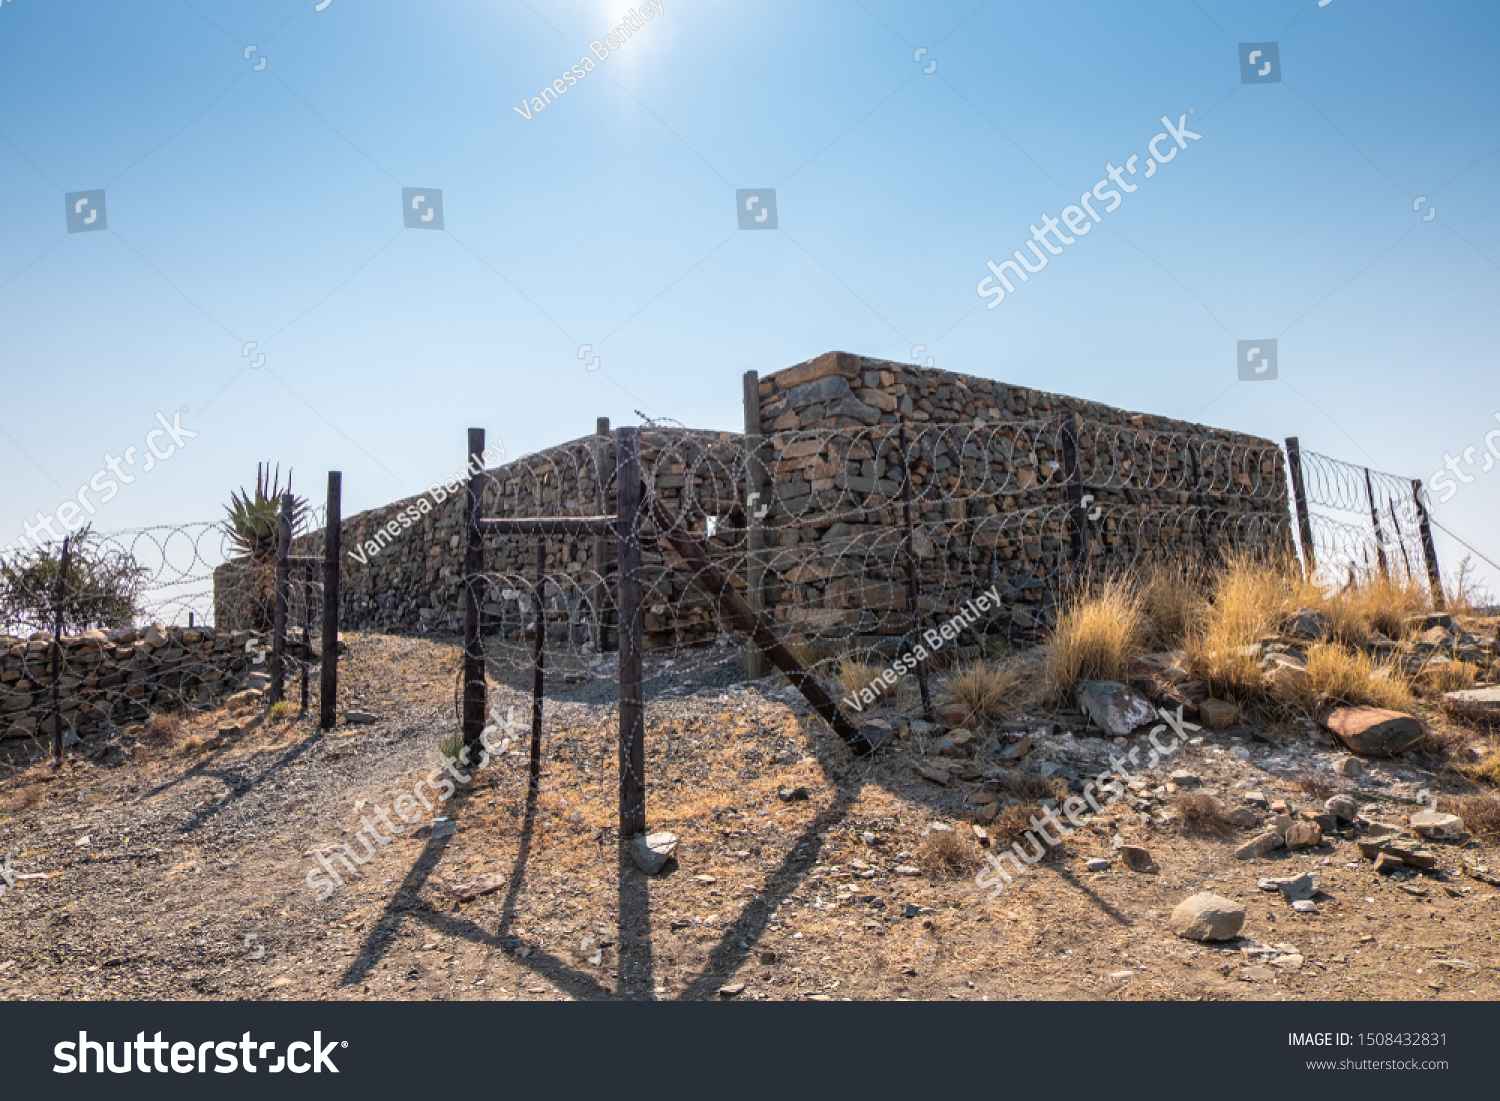 Remains of the old Anglo-Boer war fort in Jansenville, South Africa #1508432831